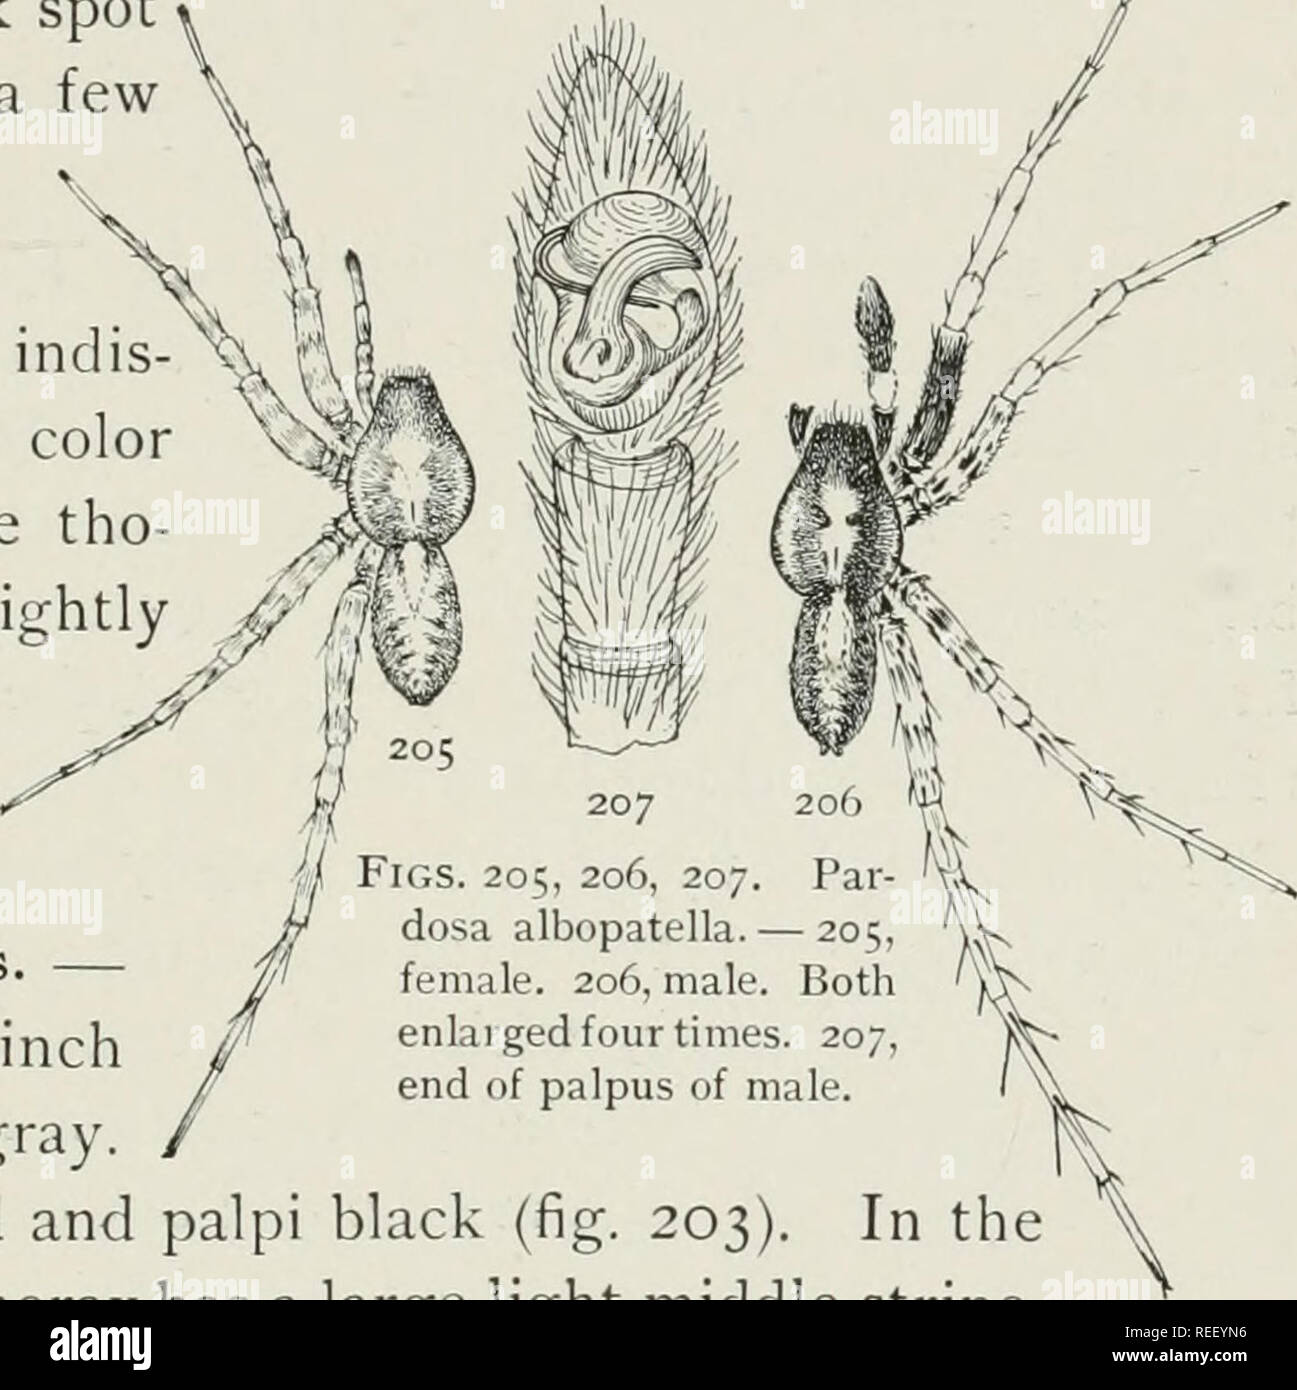 . The common spiders of the United States. Spiders. THE LYCOSID^ 83 behind. In the males (fig. 199) the colors are darker and the dark markings larger. The ends of the palpi are large and covered with black hairs. In one freshly molted young male there was hardly any trace of the spots on the sternum. The male palpi were dark gray with black hairs, except the tarsus, which was light colored, with a dark spot in the middle and a few black hairs. The markings of the abdomen were very indi tinct, and the light color brownish, while the tho- rax and legs are slightly green. The first femora were b Stock Photo